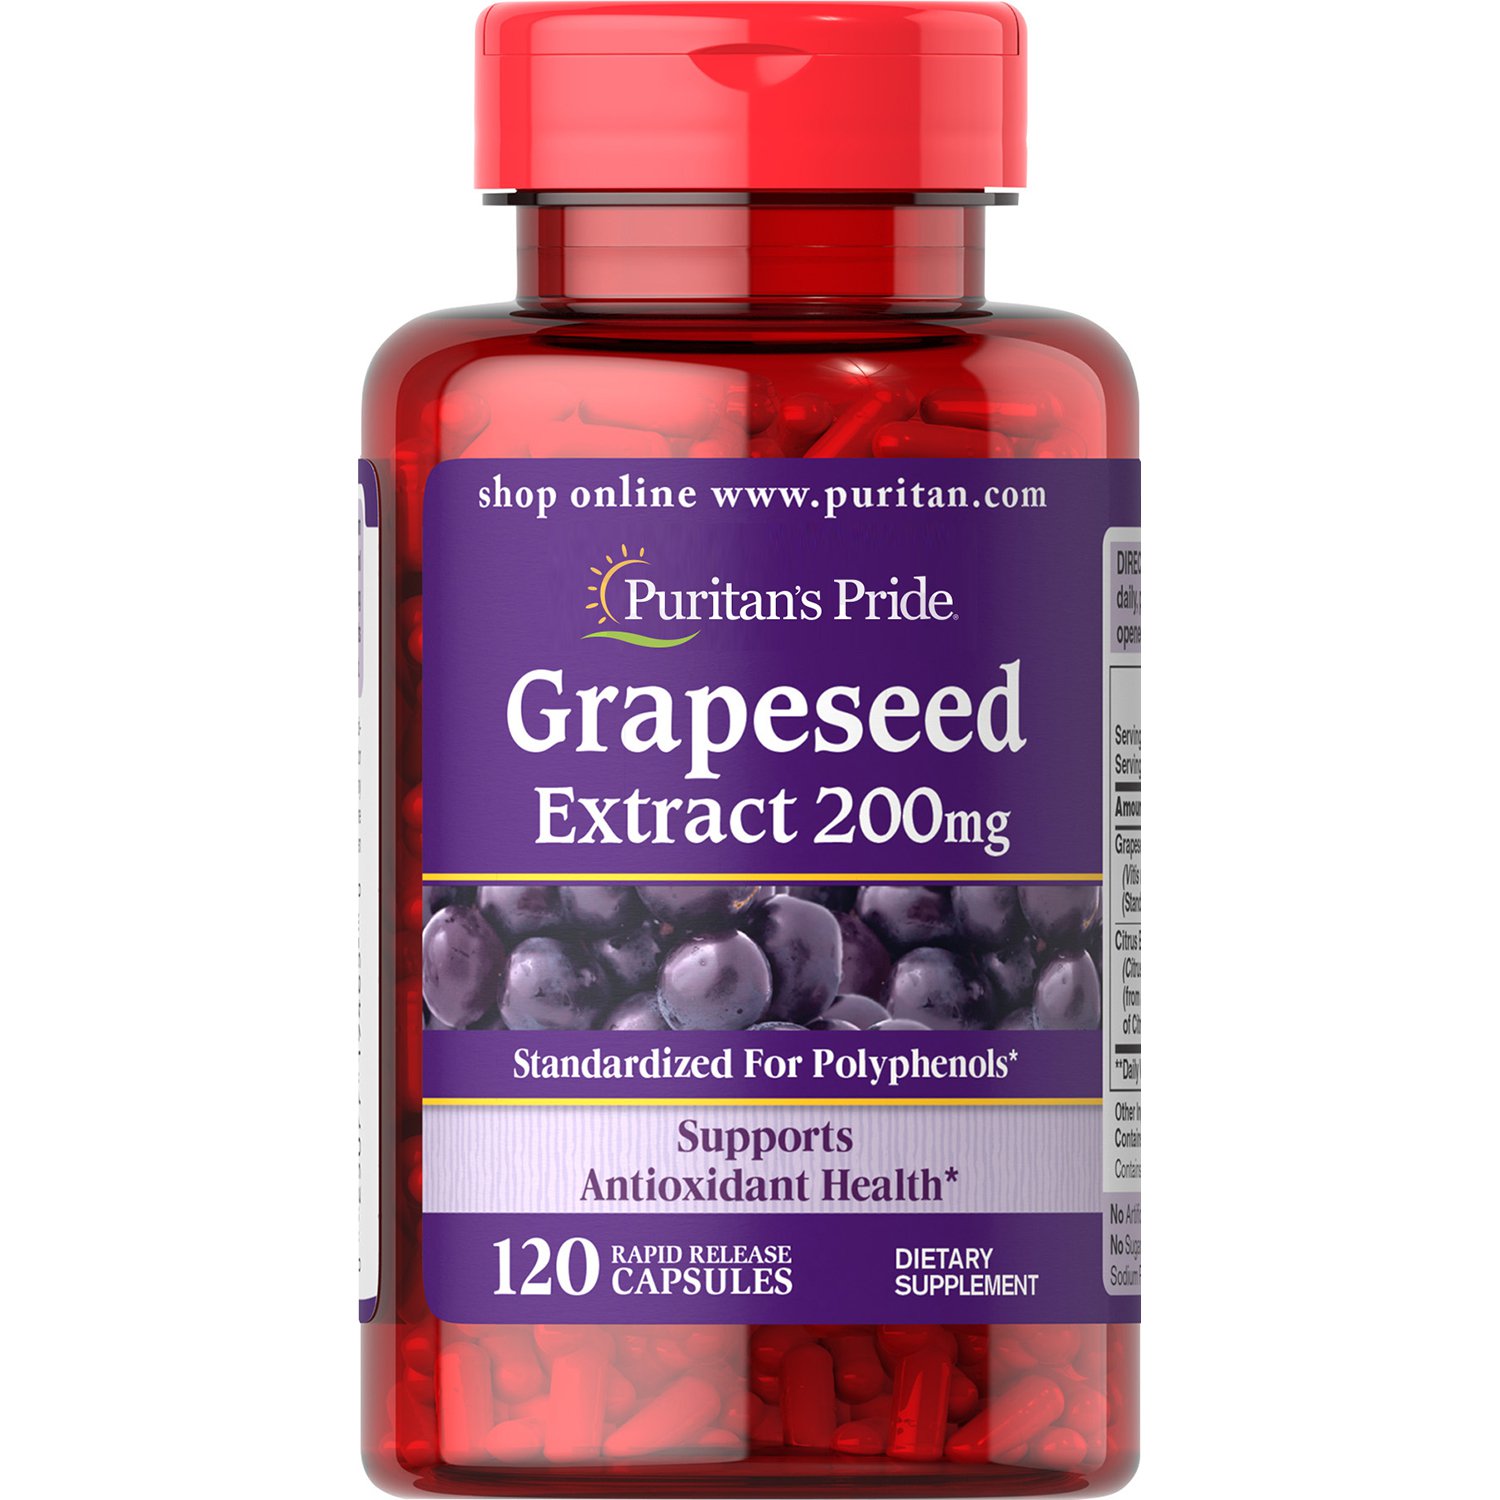 Puritan's Pride Grapeseed Extract 200 mg, 120 Capsules